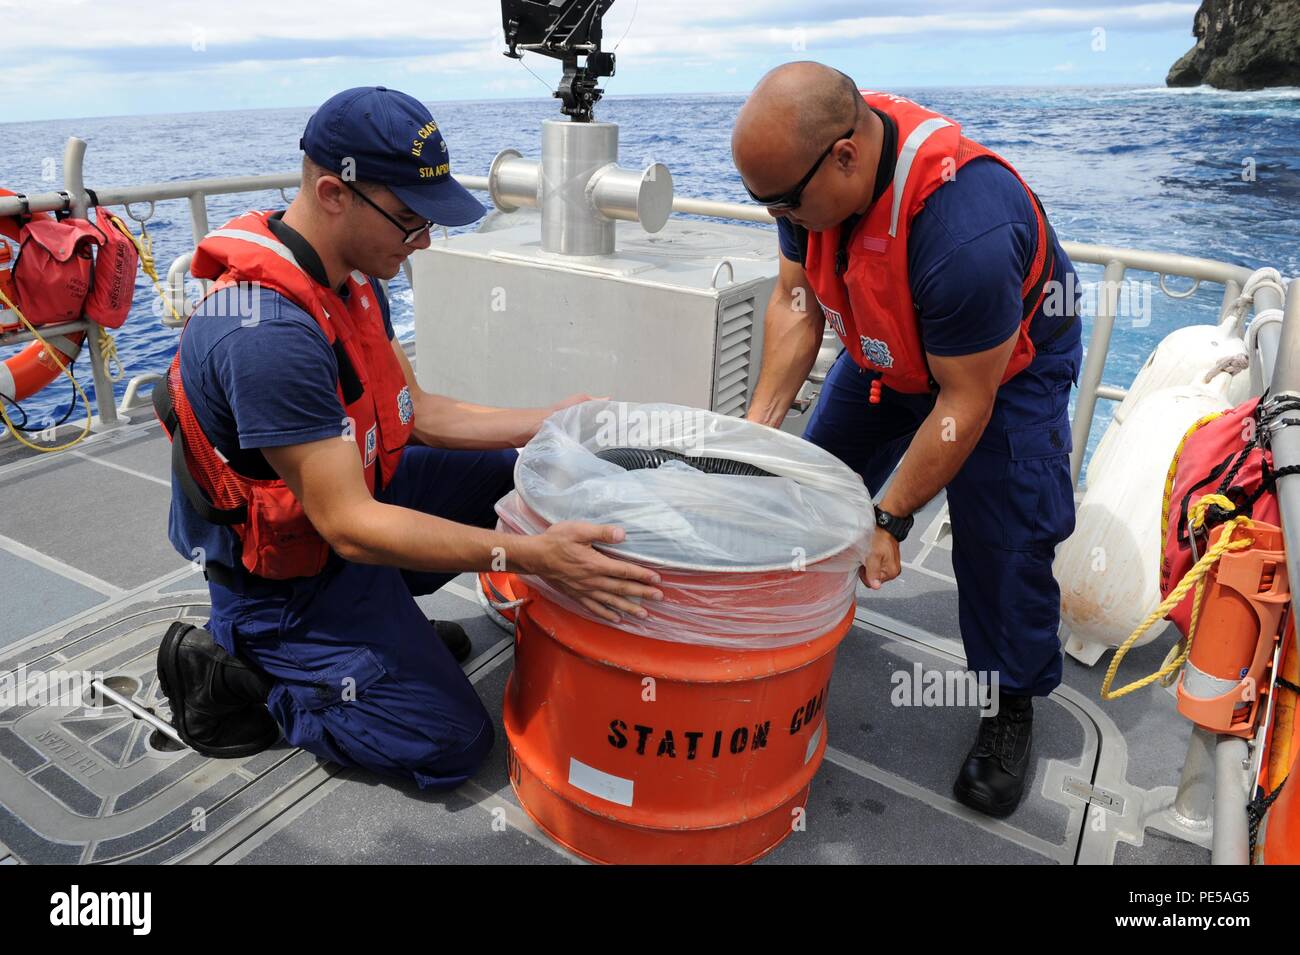 150930-N-ZB122-005 SANTA RITA, GUAM (Sept. 30, 2015) – Off the coast of Naval Base Guam, U.S. Coast Guard  Boatswain's Mate 3rd Class  John Jordan-Bertucci (left) and Boatswain's Mate 2nd Class Juan Jaijeron prepare to demonstrate how to use a Honda de-watering portable pump (p-6) for removing excess water on boats on Sept. 30. Based on Naval Base Guam, the U.S. Coast Guard Apra Harbor's primary missions here include search and rescue, law enforcement and protecting of living marine resources and critical infrastructures in and under the water. (U.S. Navy photo by Mass Communication Specialist Stock Photo